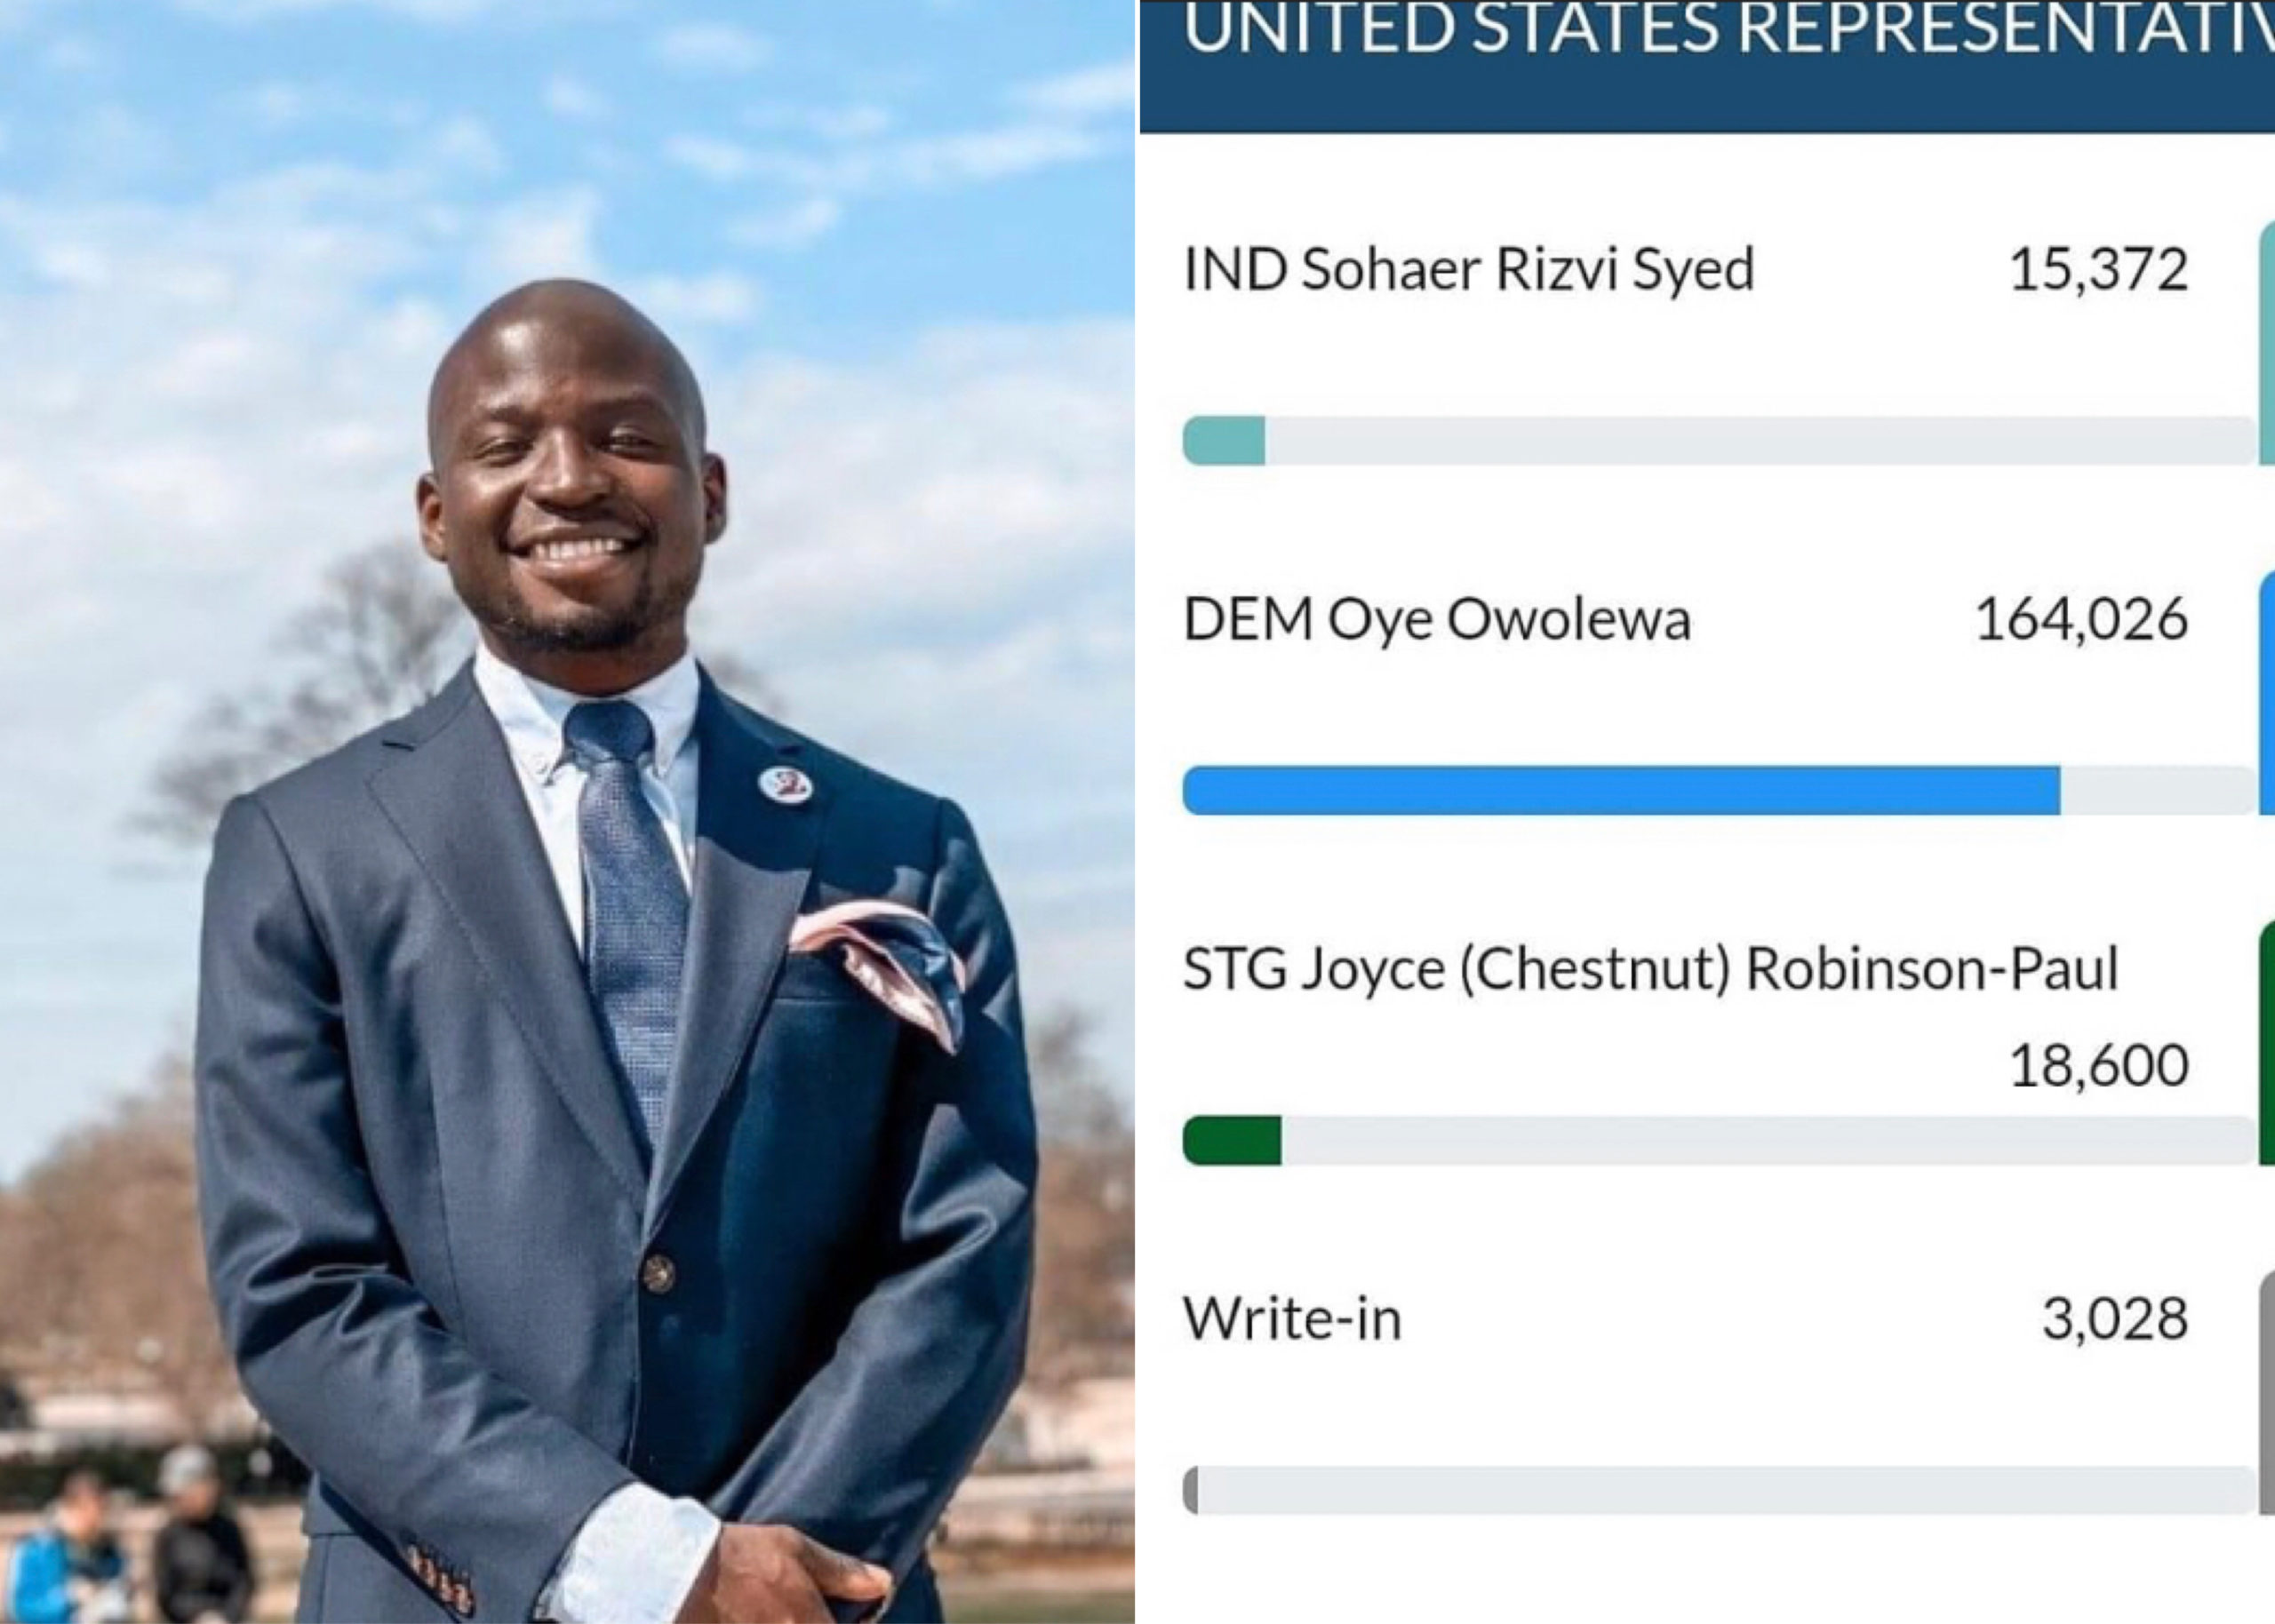 31-Year-Old Man, Adeoye Owolewa Becomes First Nigerian To Be Elected To US Congress